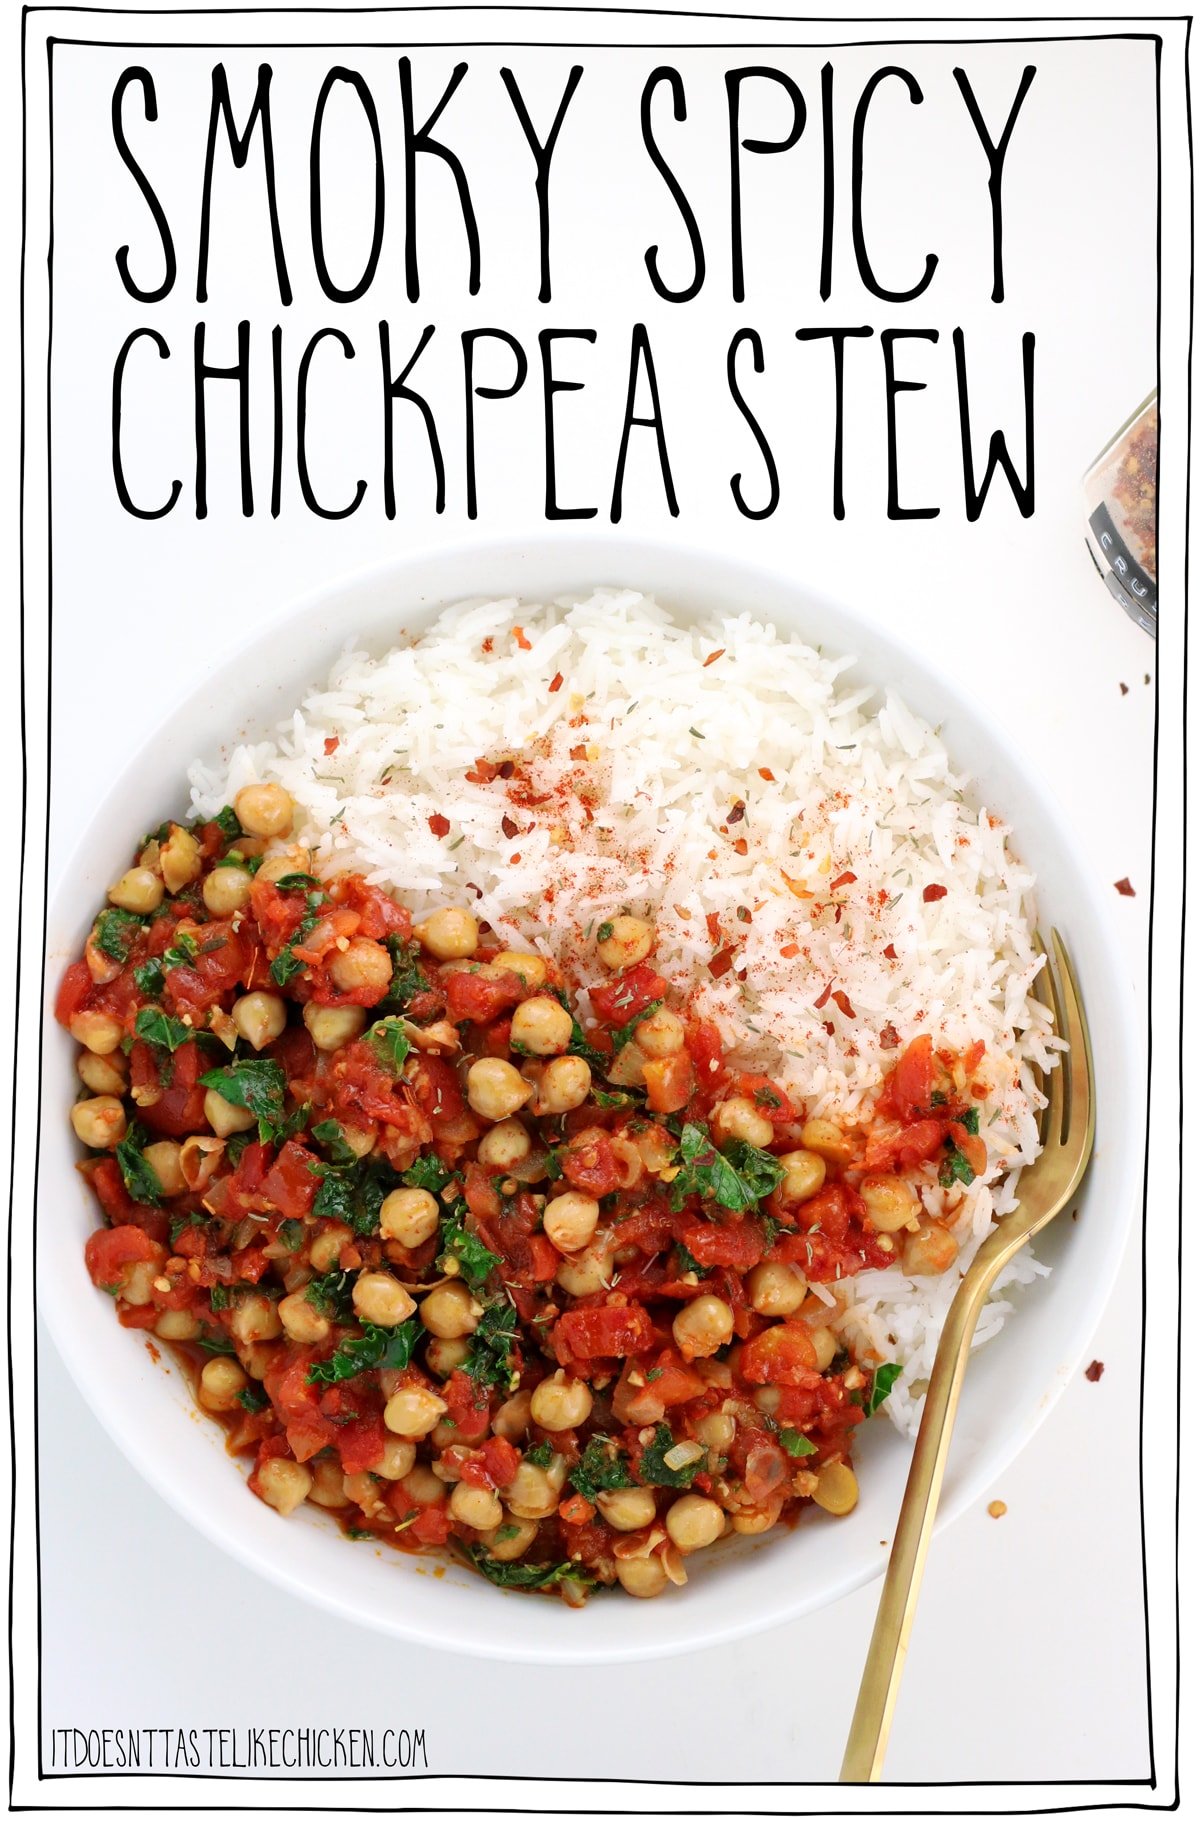 Smoky Spicy Chickpea Stew! Super quick and easy to make, but don't be fooled by the simplicity of this recipe, it's bursting with complex flavours. It gets even better the next day so it's a perfect make-ahead meal. #itdoesnttastelikechicken #veganrecipes #pantryrecipe